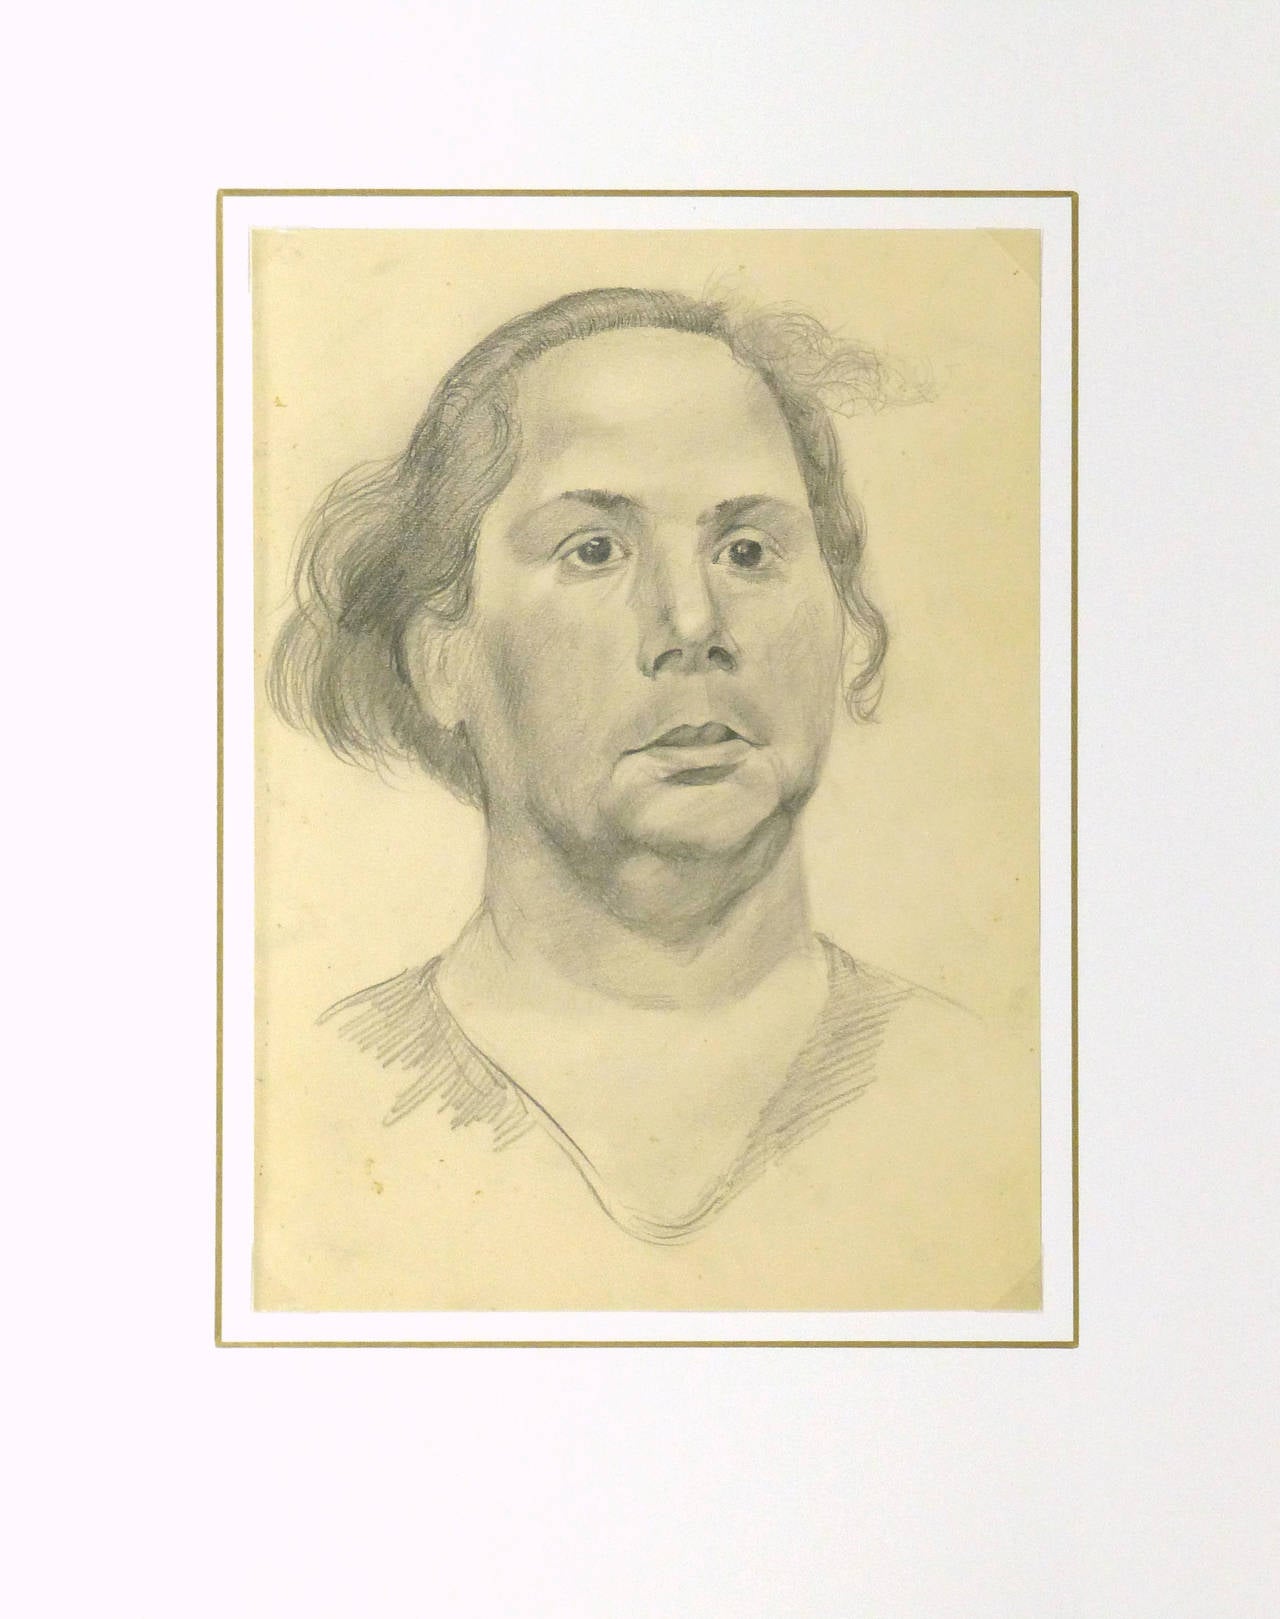 Delightful vintage pencil drawing of composed pose by W. Langer, circa 1930.

Original one-of-a-kind artwork on paper displayed on a white mat with a gold border. Mat fits a standard-size frame. Archival plastic sleeve and Certificate of